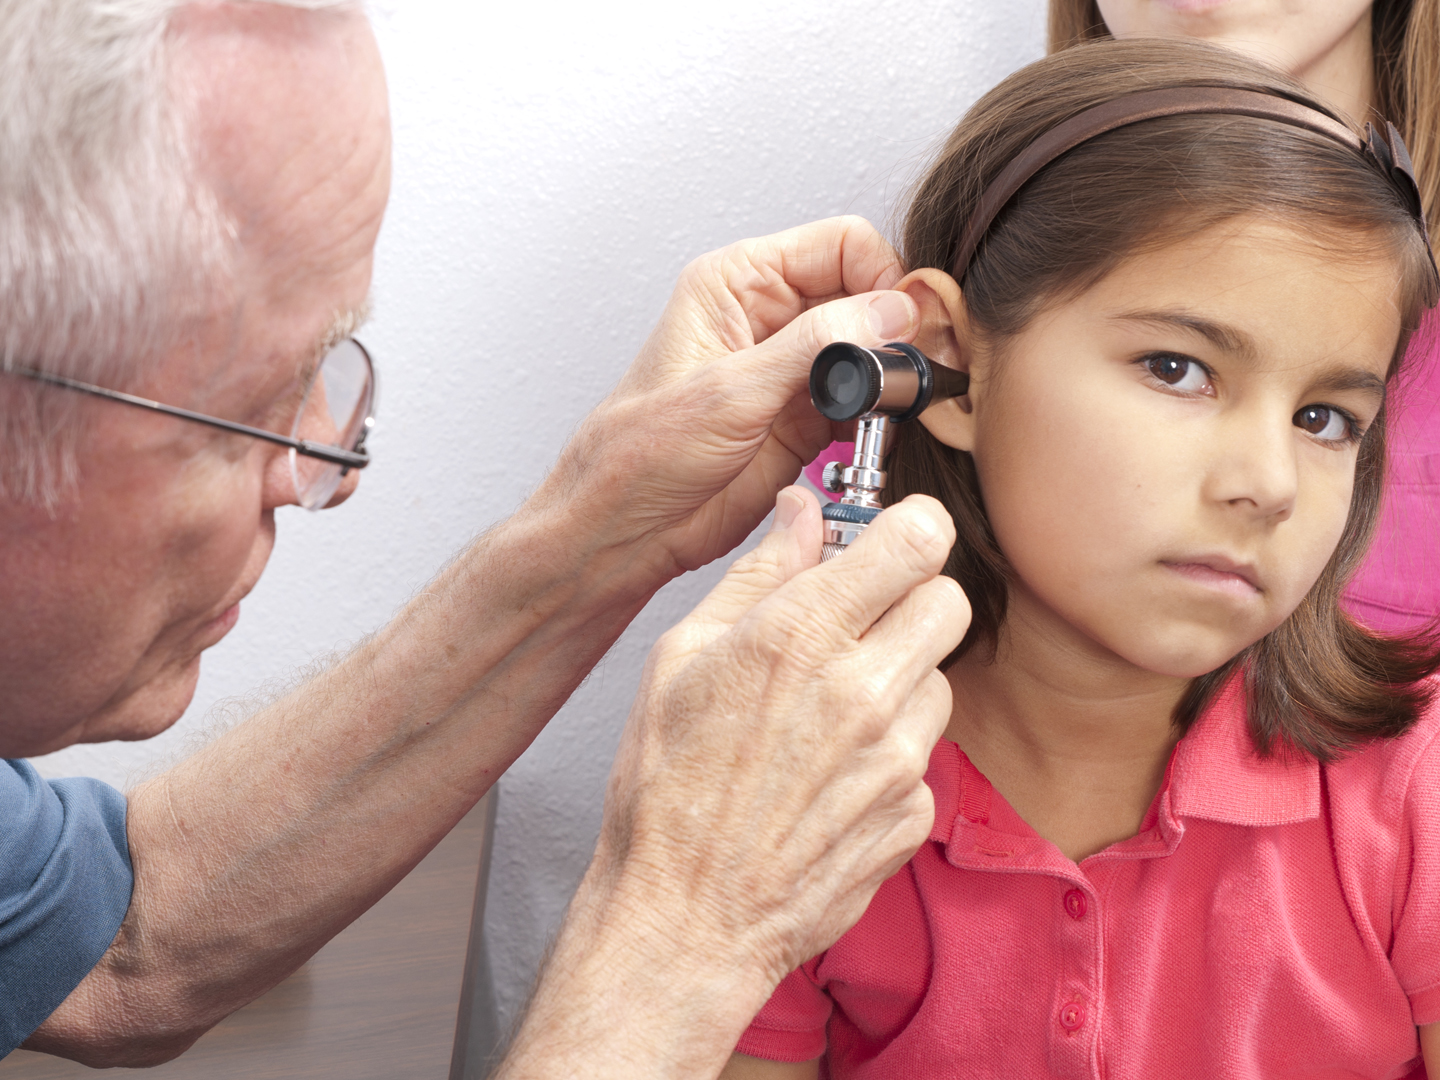 &quot;Stoic, brave young girl allows doctor to look into her ear with otoscope as she sits on her mother&#039;s lap.  He could be checking for otitis media, middle ear infection&quot;